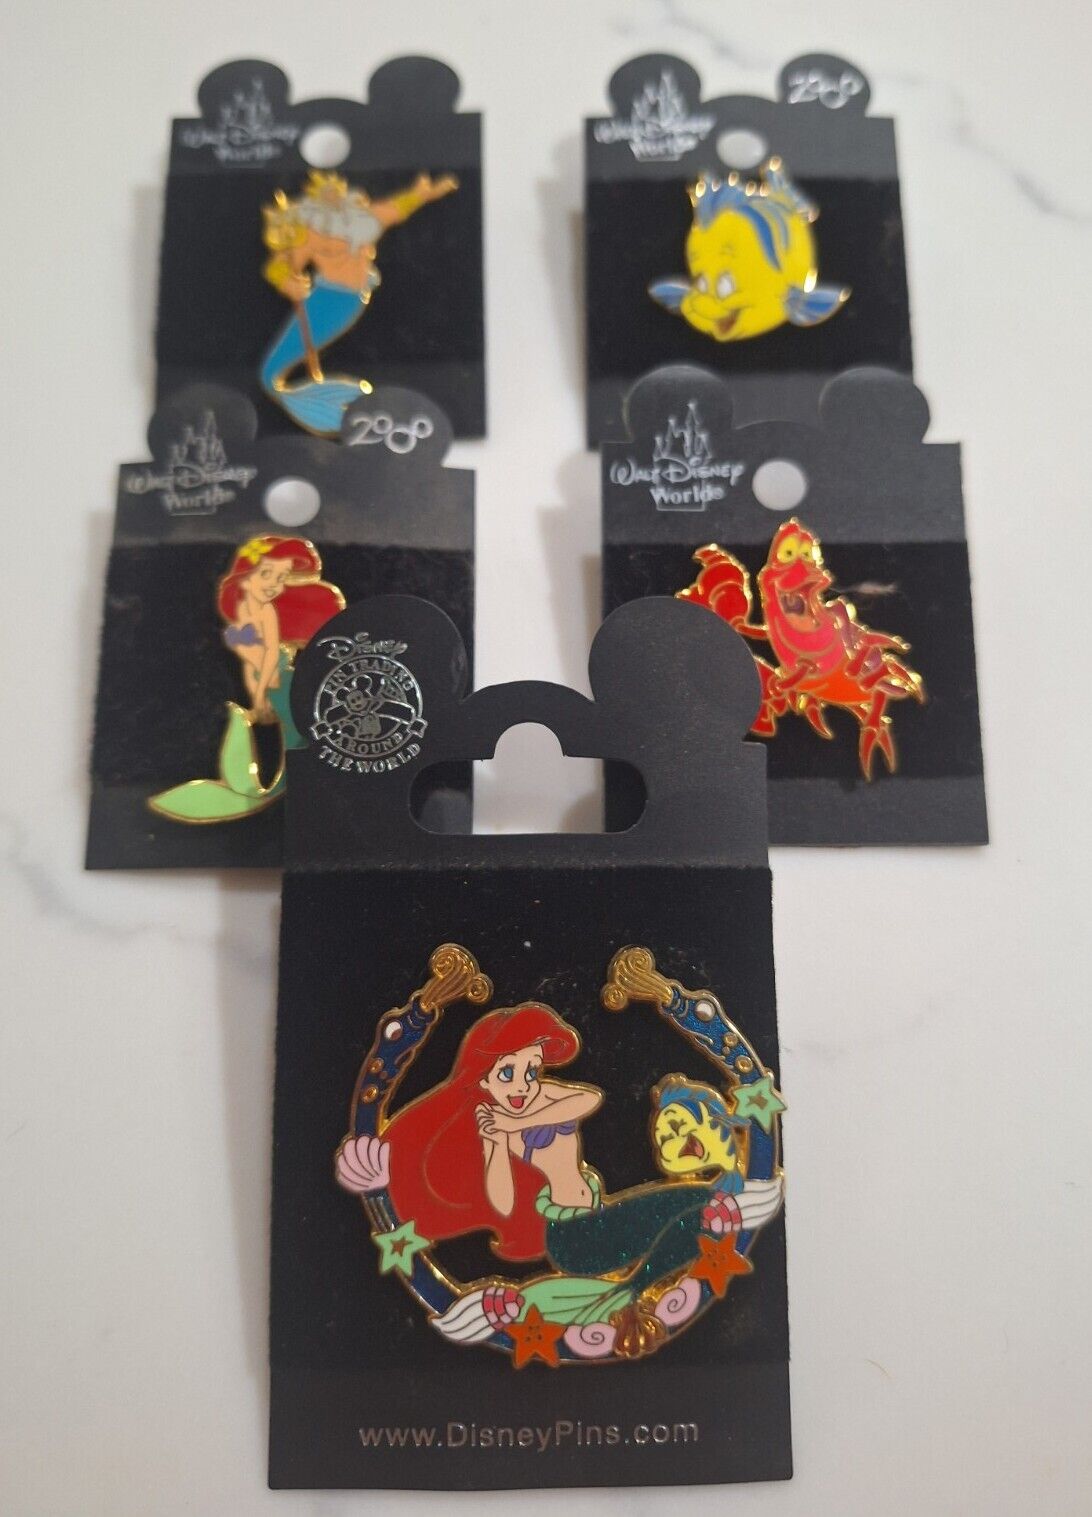 Vintage Early 2000s Disney The Little Mermaid Pin - LOT of 5 Disney Pins